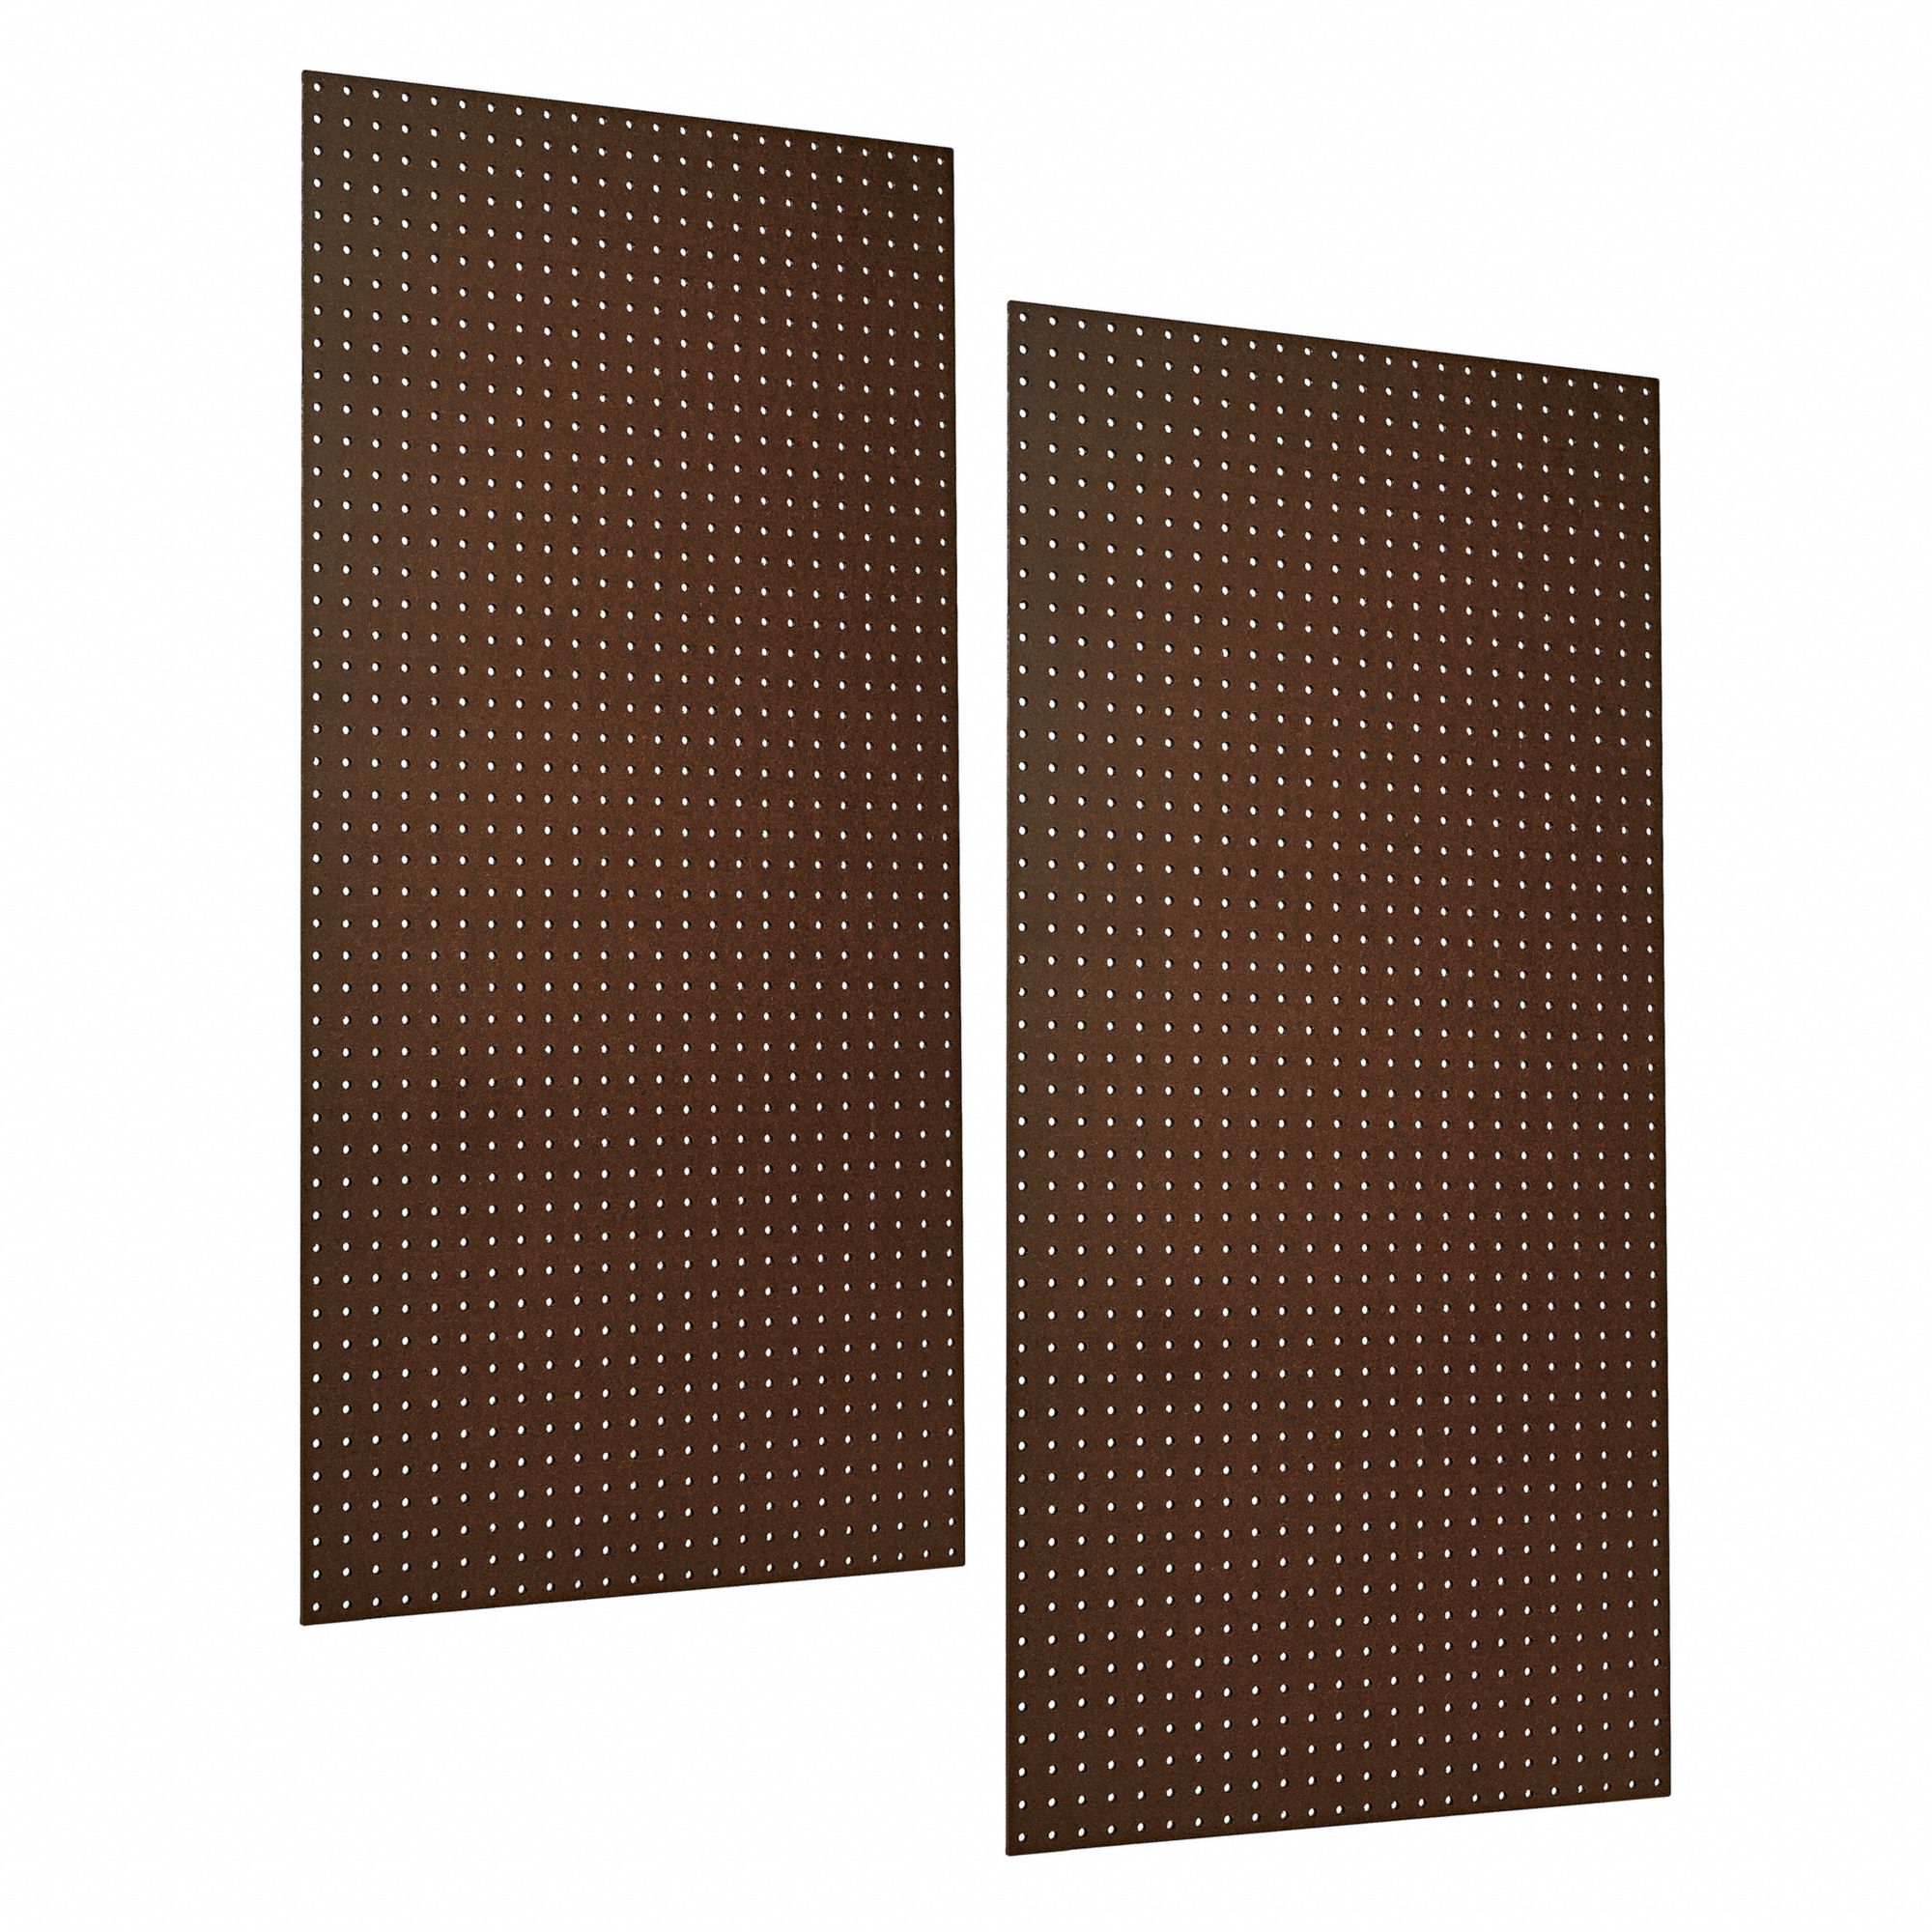 Pegboard Panel: Round, 1/4 in Peg Hole Size, 48 in x 24 in x 1/8 in, Hardwood